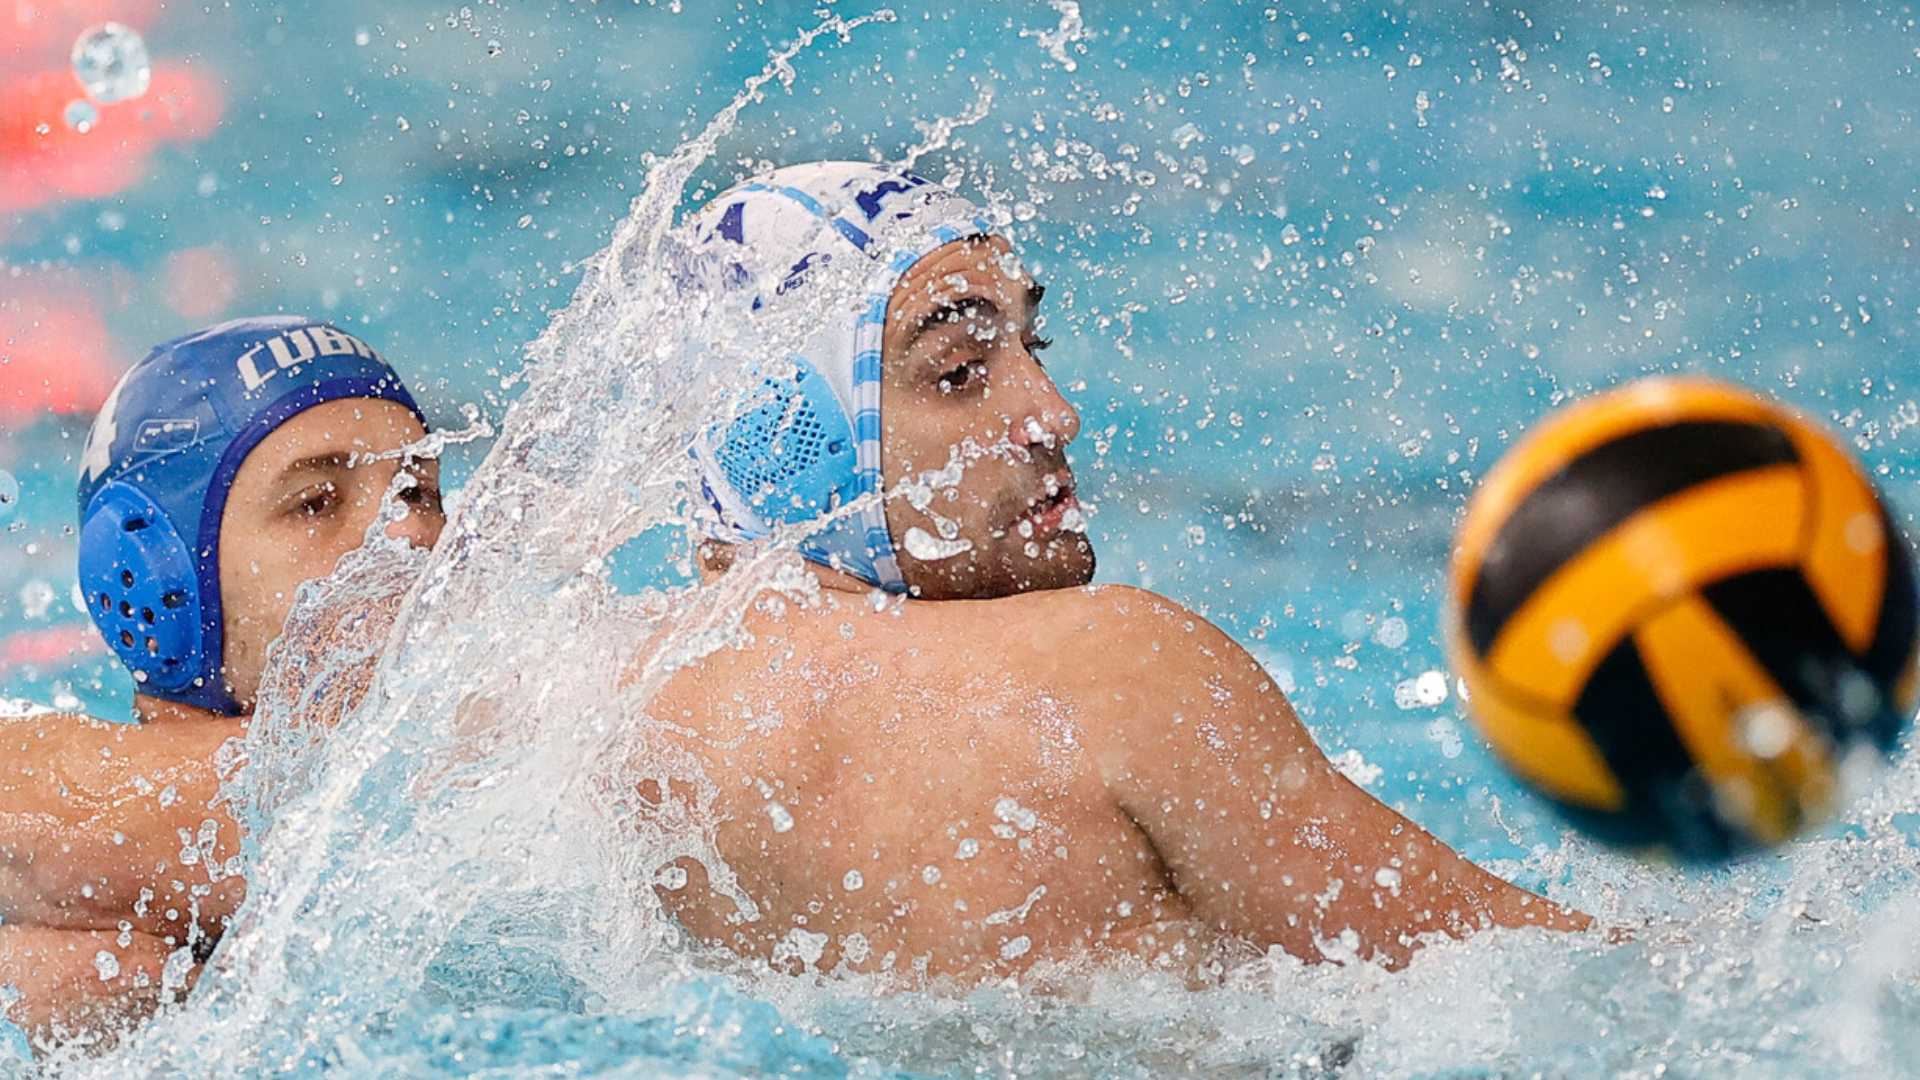 Argentina crushes Cuba and starts off strong in males water polo